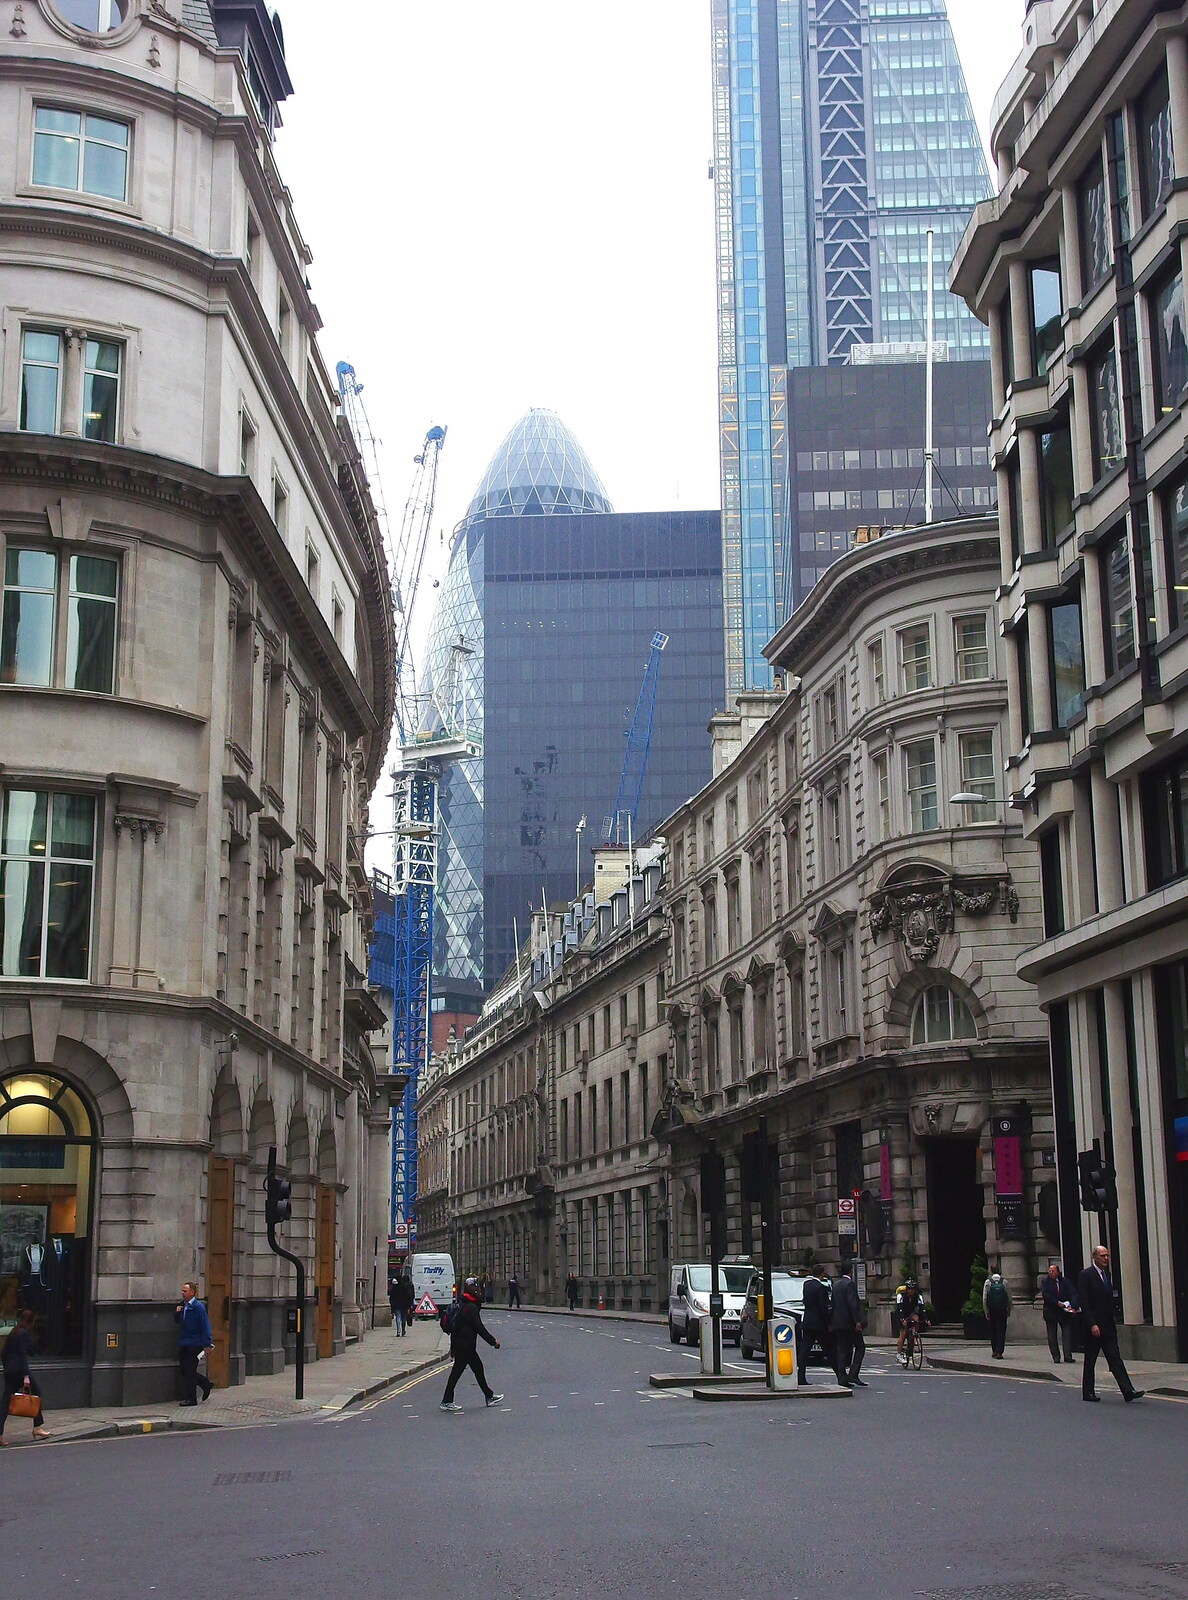 Looking towards the Swiss Re Gherkin from A Trainey Sort of Week, Liverpool Street, City of London - 3rd April 2014